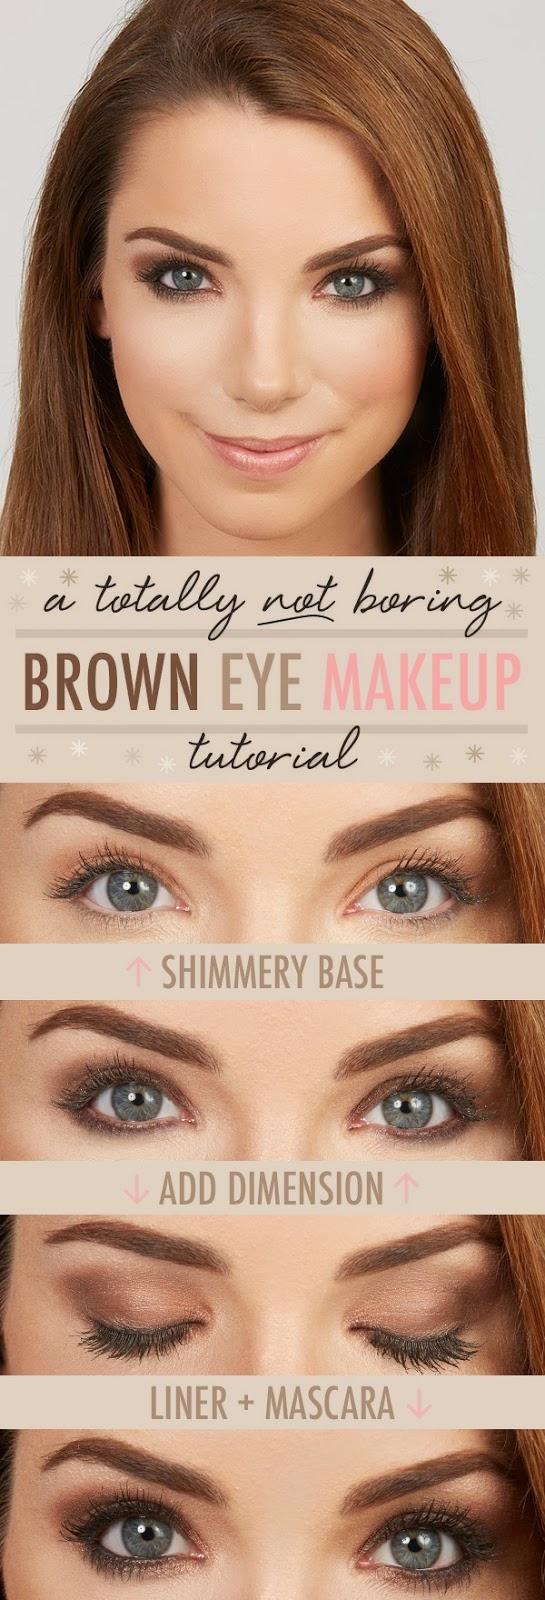 Makeup Tutorial For Brown Eyes Younique Kristen Morton Brown Eye Makeup Tutorial